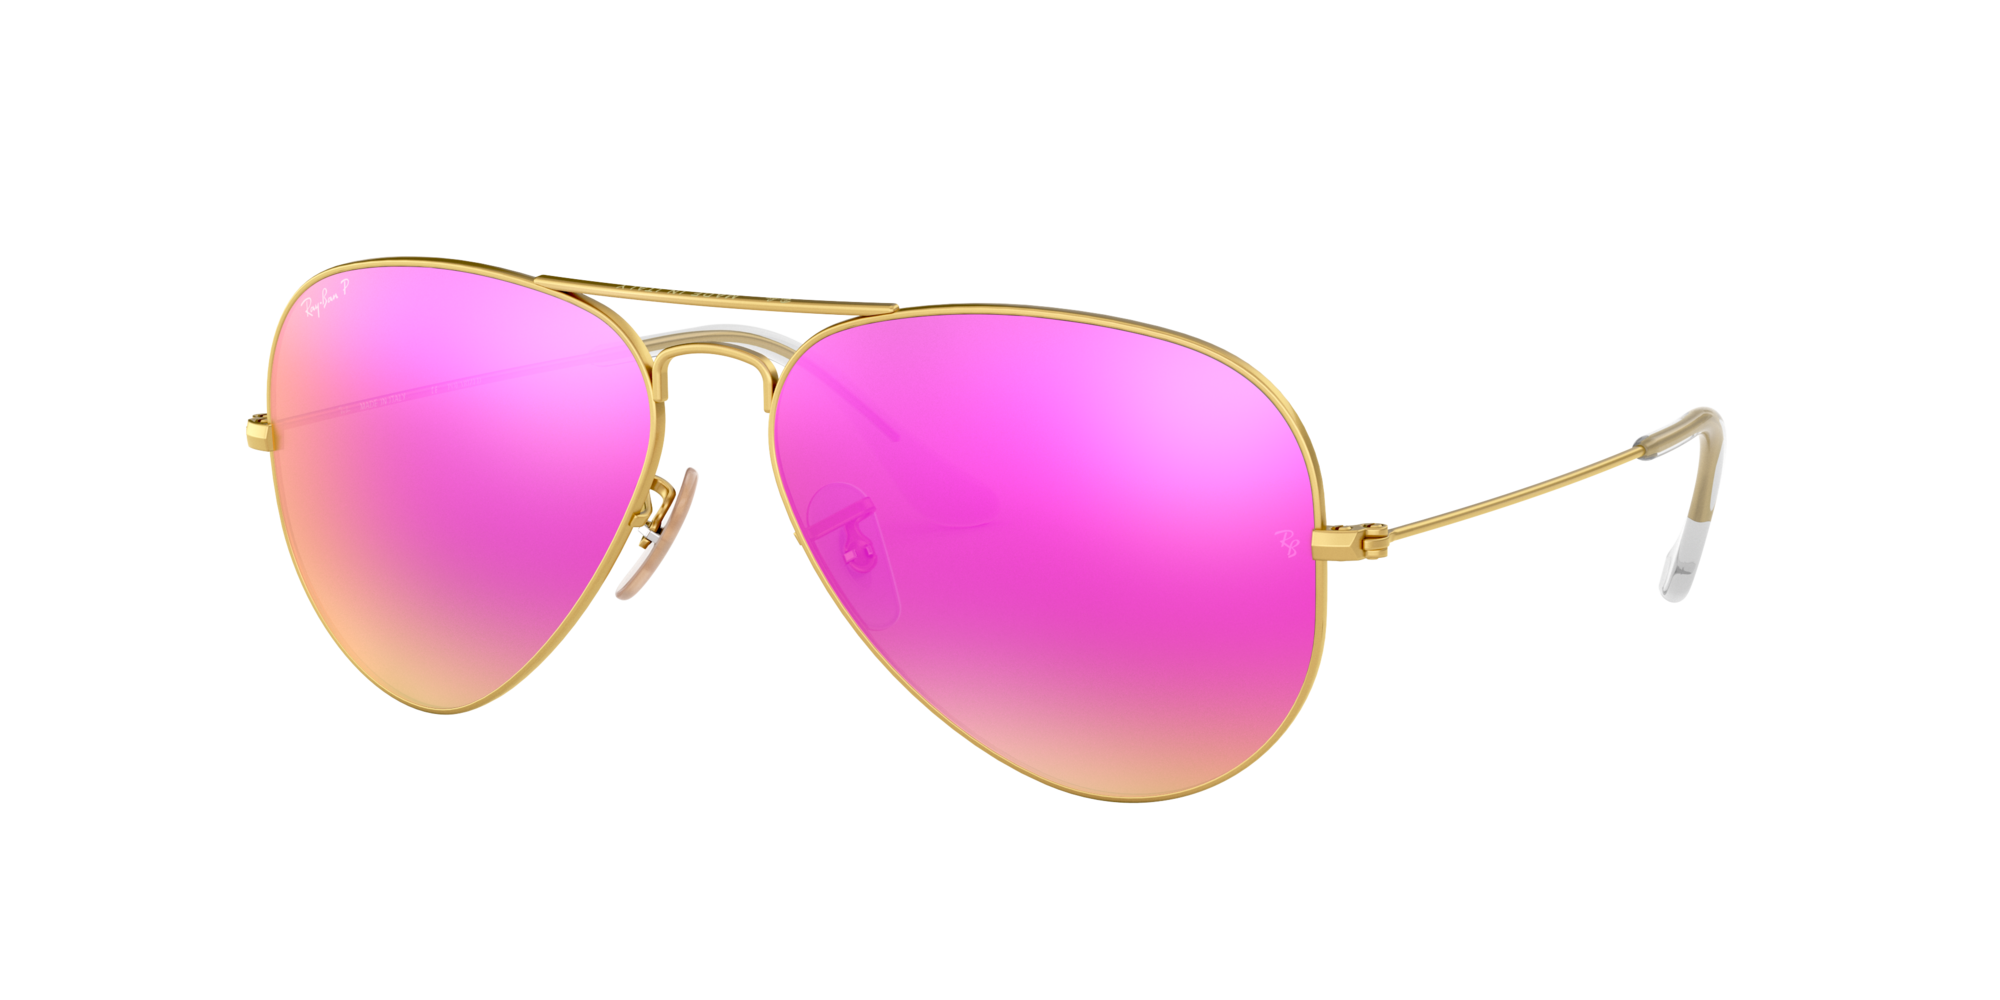 Top more than 166 polarized pink lens sunglasses